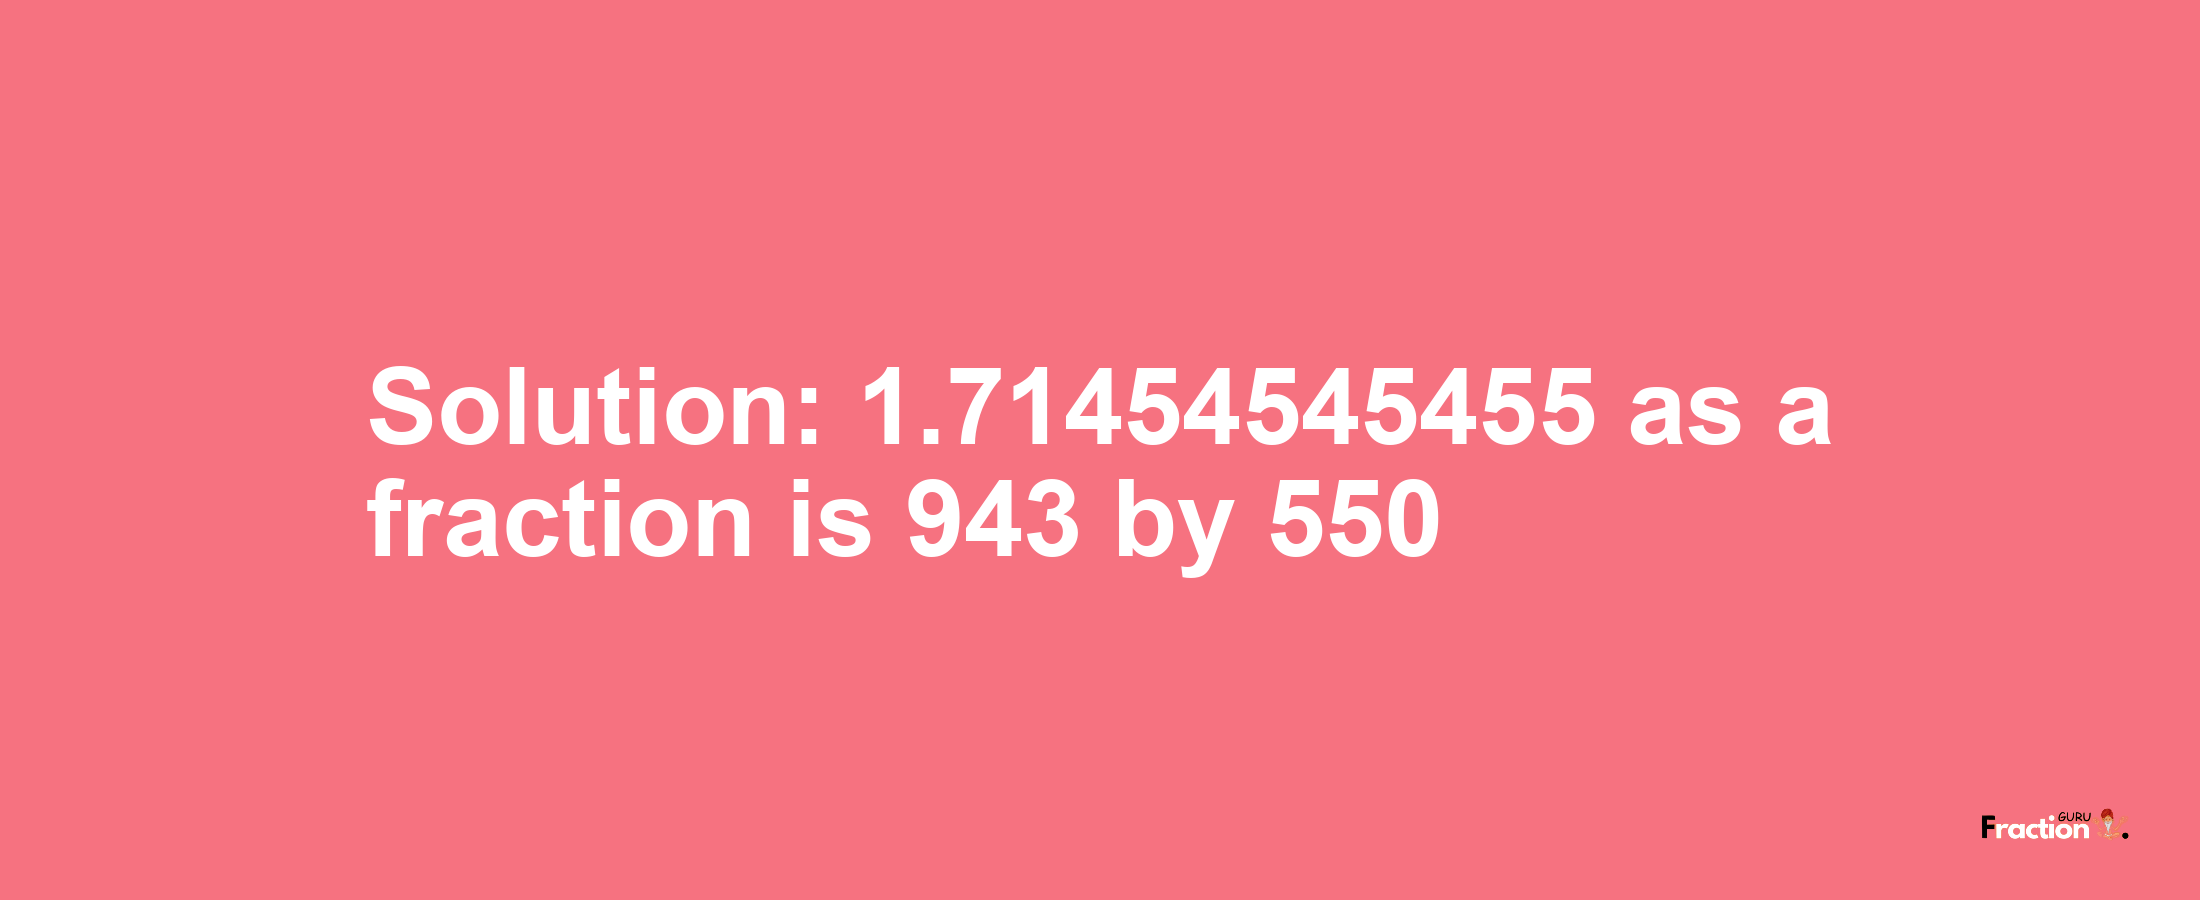 Solution:1.71454545455 as a fraction is 943/550